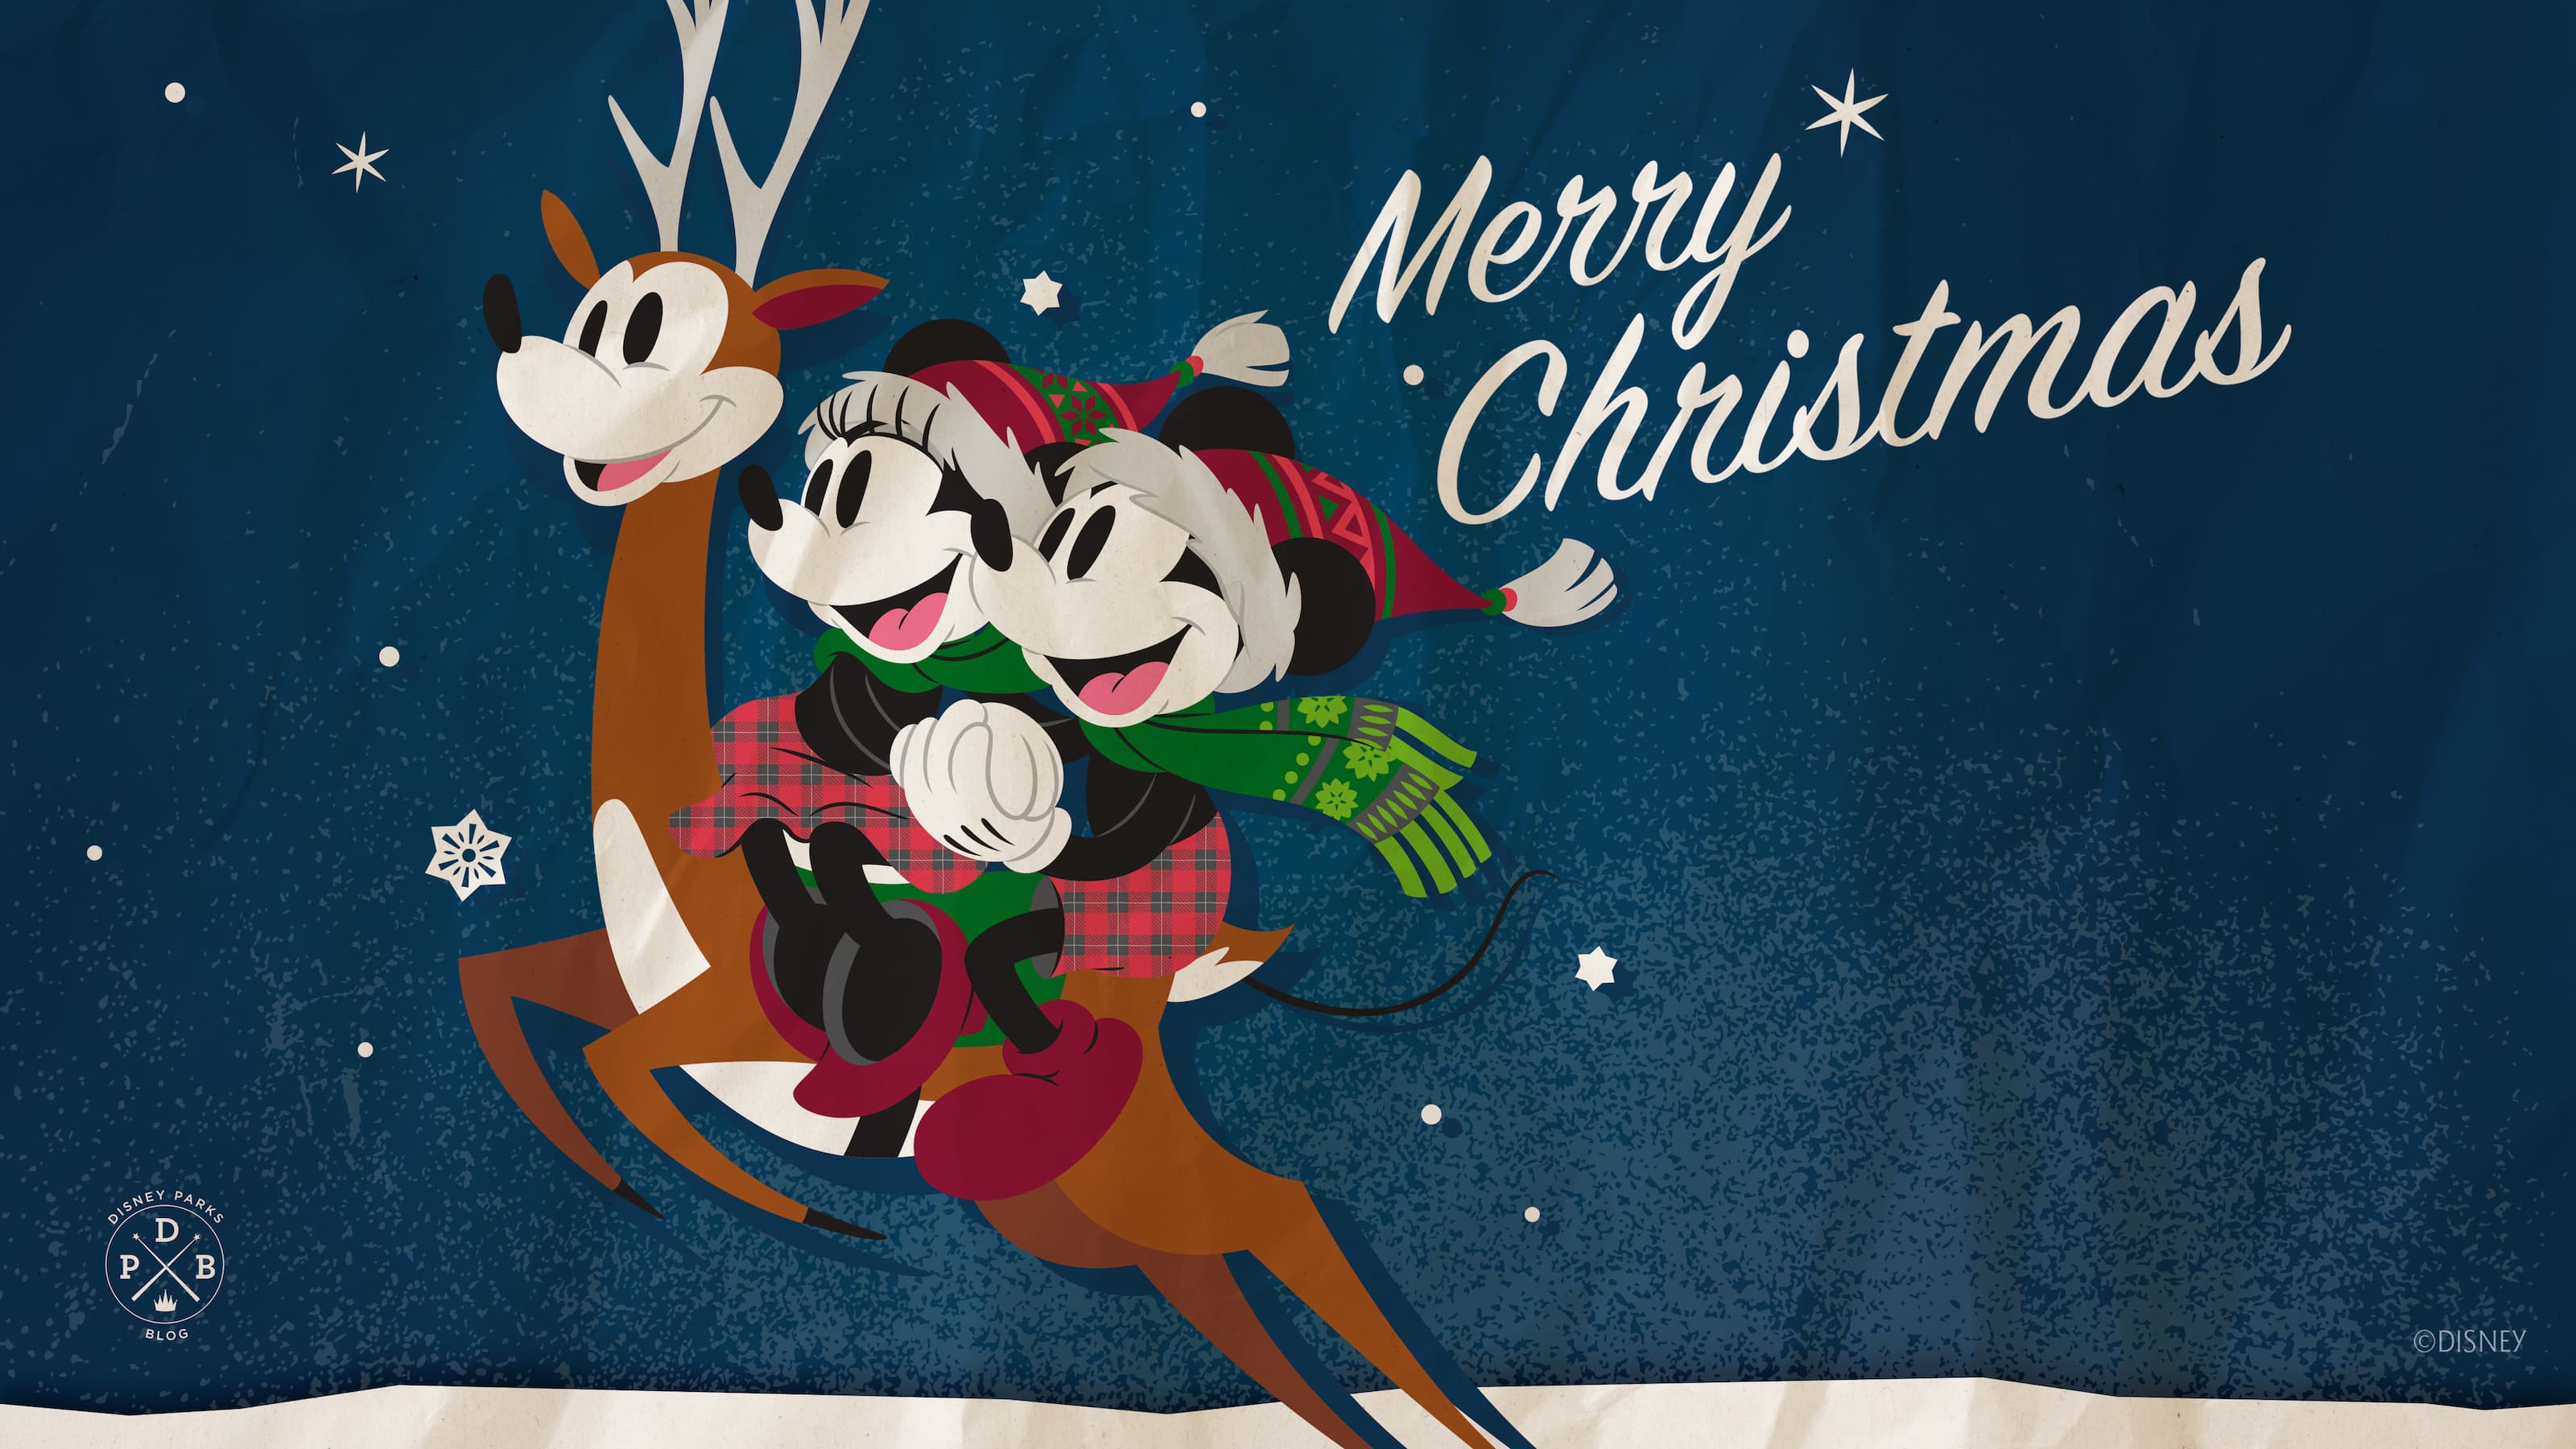 Mickey and Minnie on a reindeer with the text 